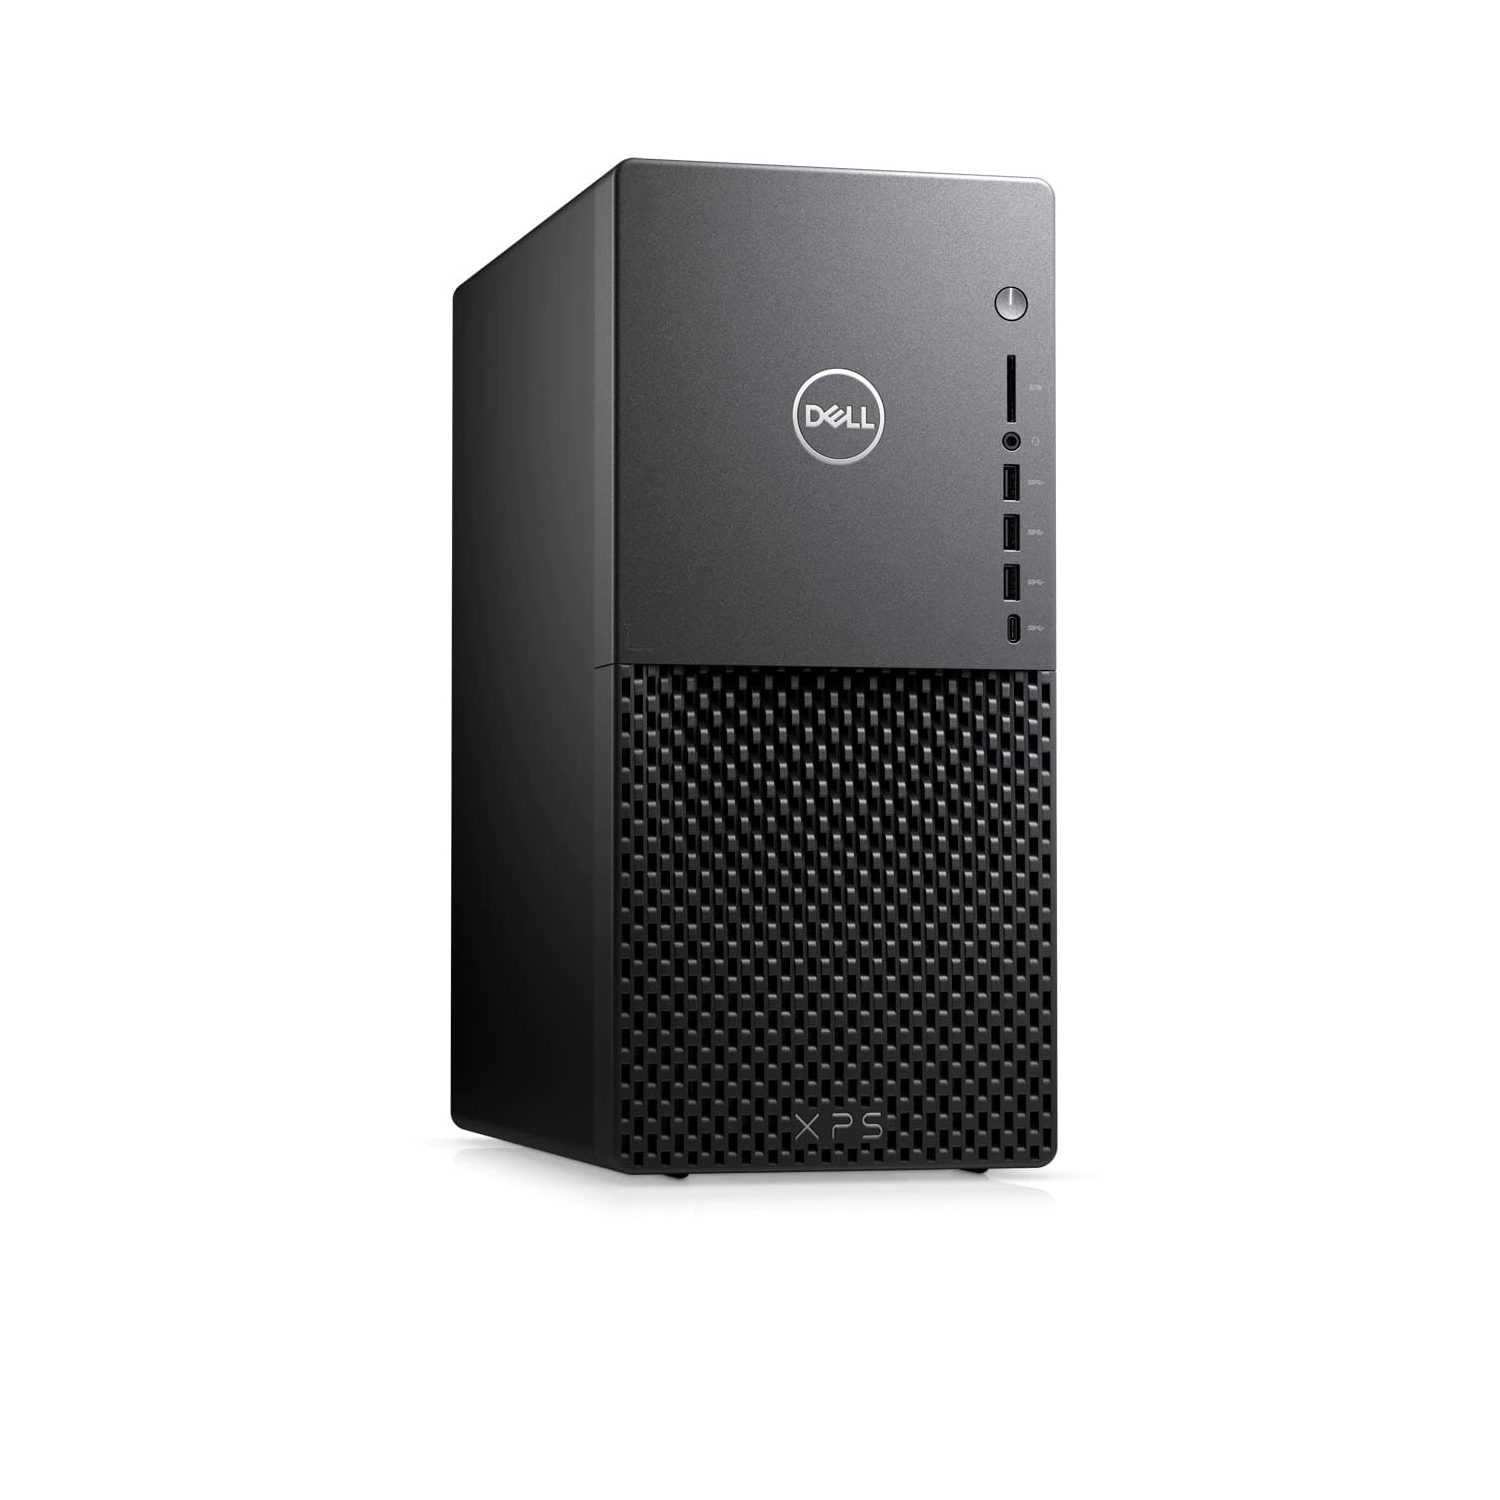 Refurbished (Excellent) - Dell XPS 8940 Desktop (2020) | Core i7 - 1TB SSD + 1TB HDD - 32GB RAM - 1660 Ti | 8 Cores @ 4.9 GHz - 11th Gen CPU Certified Refurbished